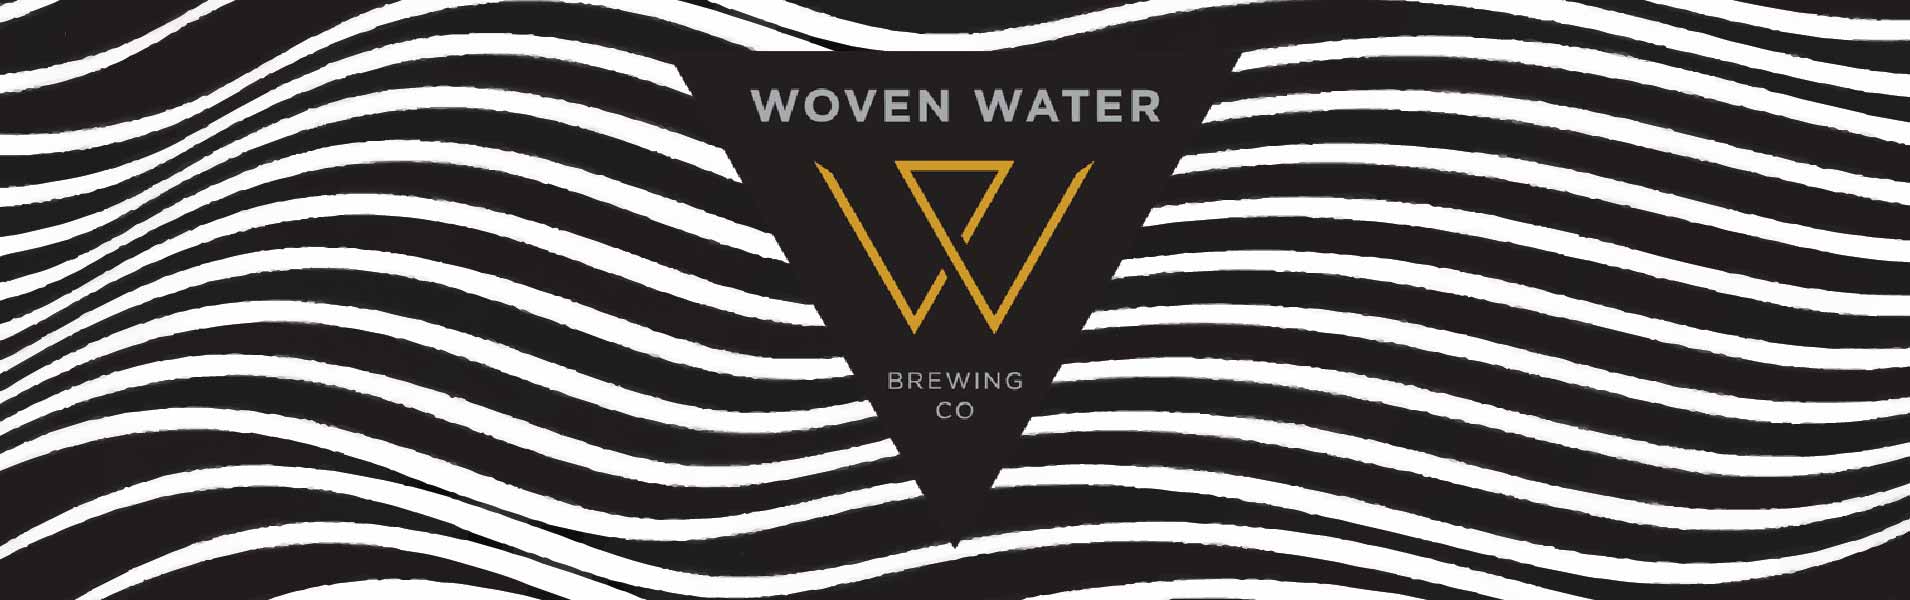 Woven Water Brewing